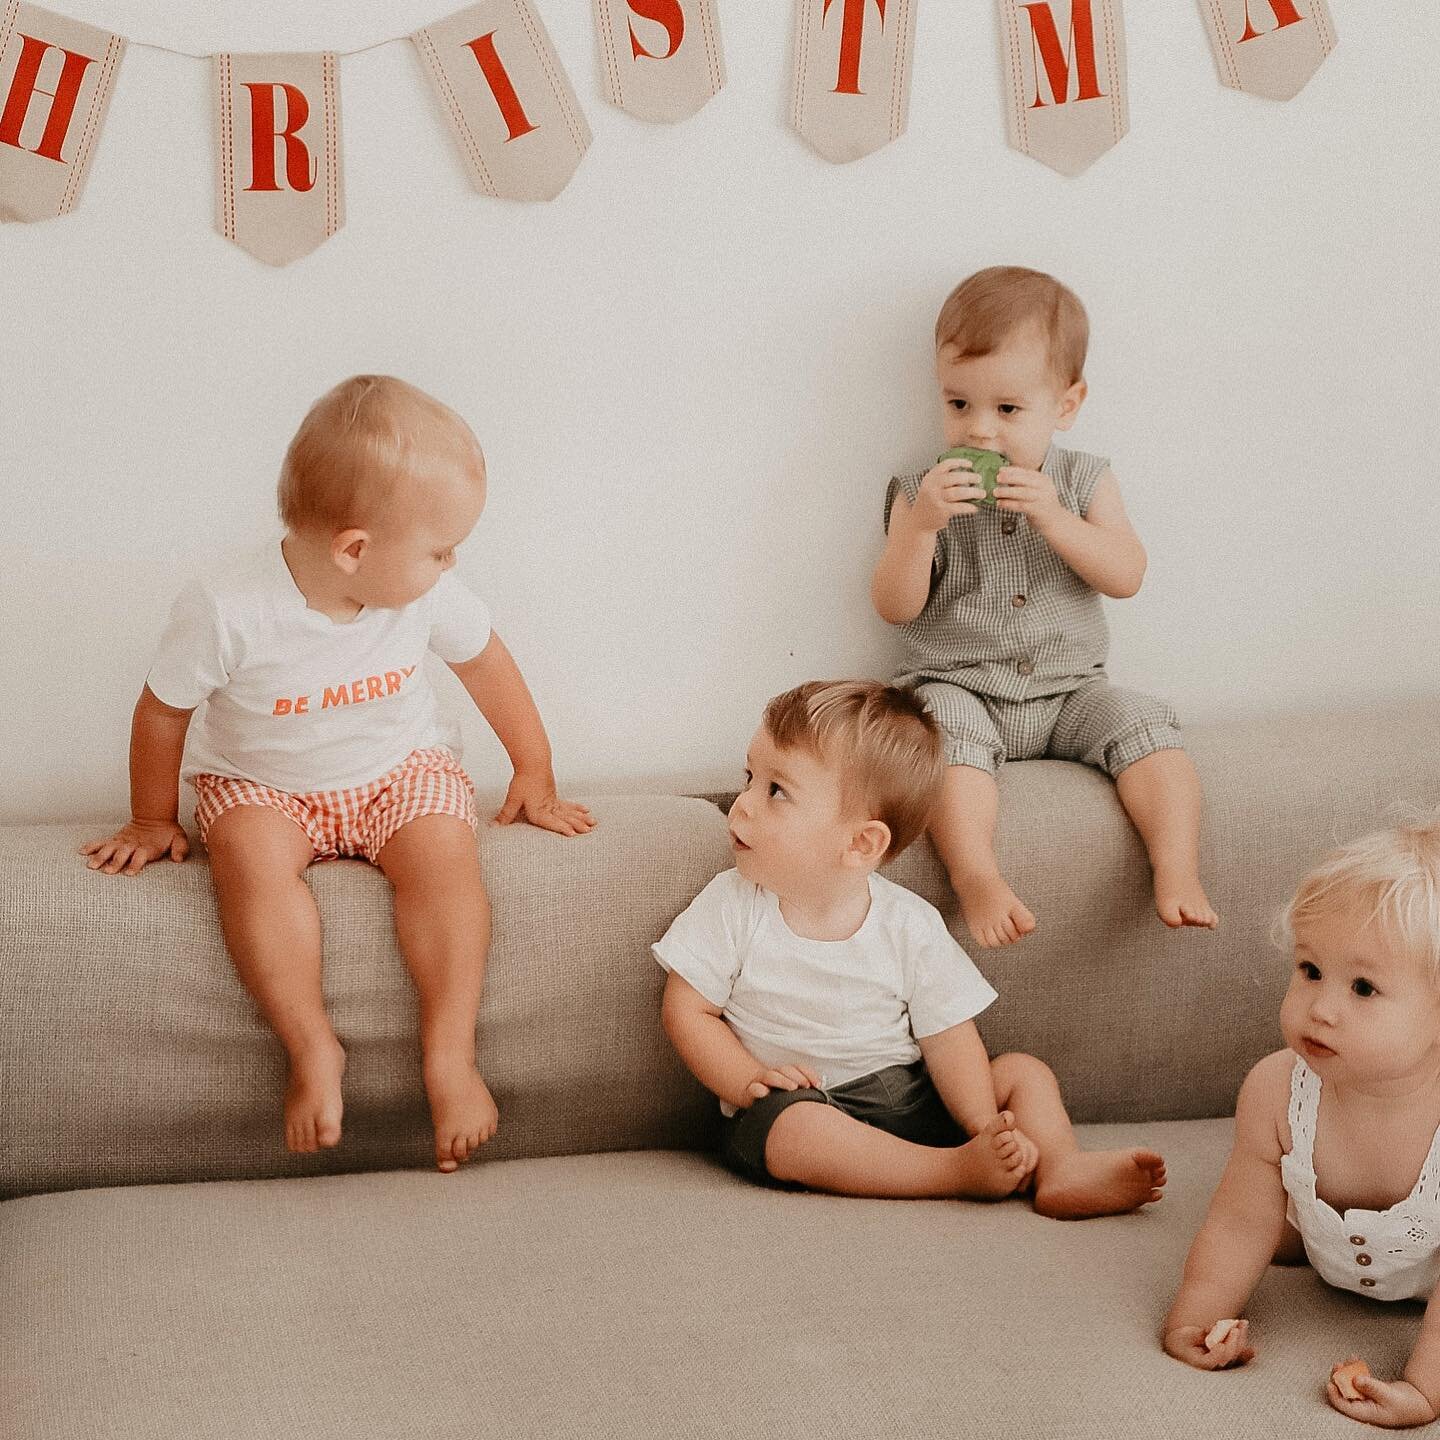 Babies babies everywhere! What a lovely group of bubs all together, I had a blast shooting these little tots!